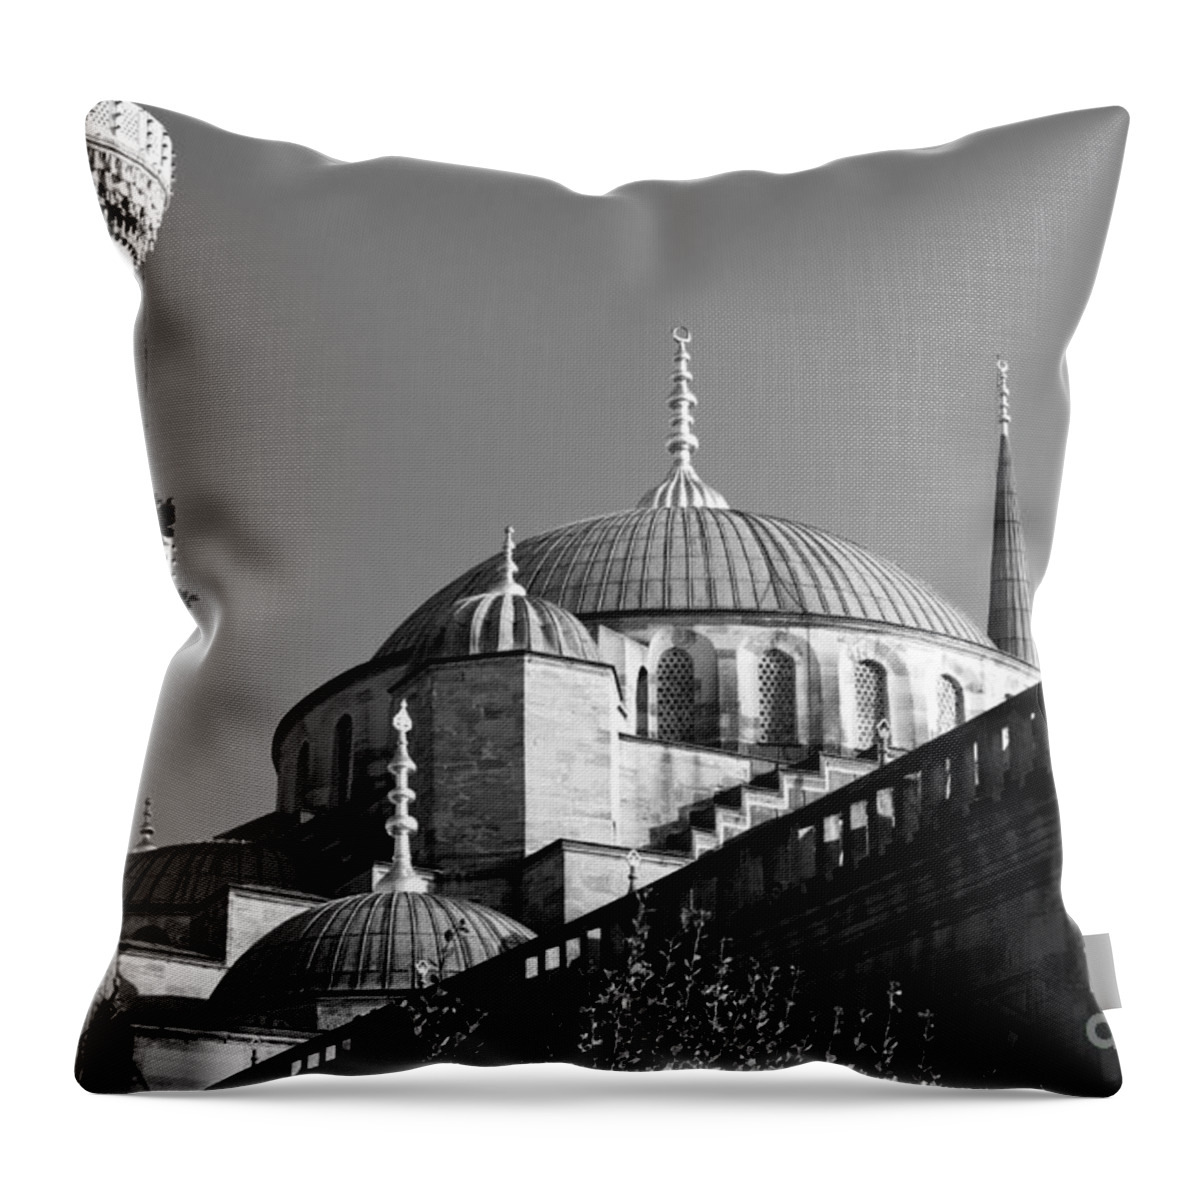 Istanbul Throw Pillow featuring the photograph Blue Mosque 04 by Rick Piper Photography